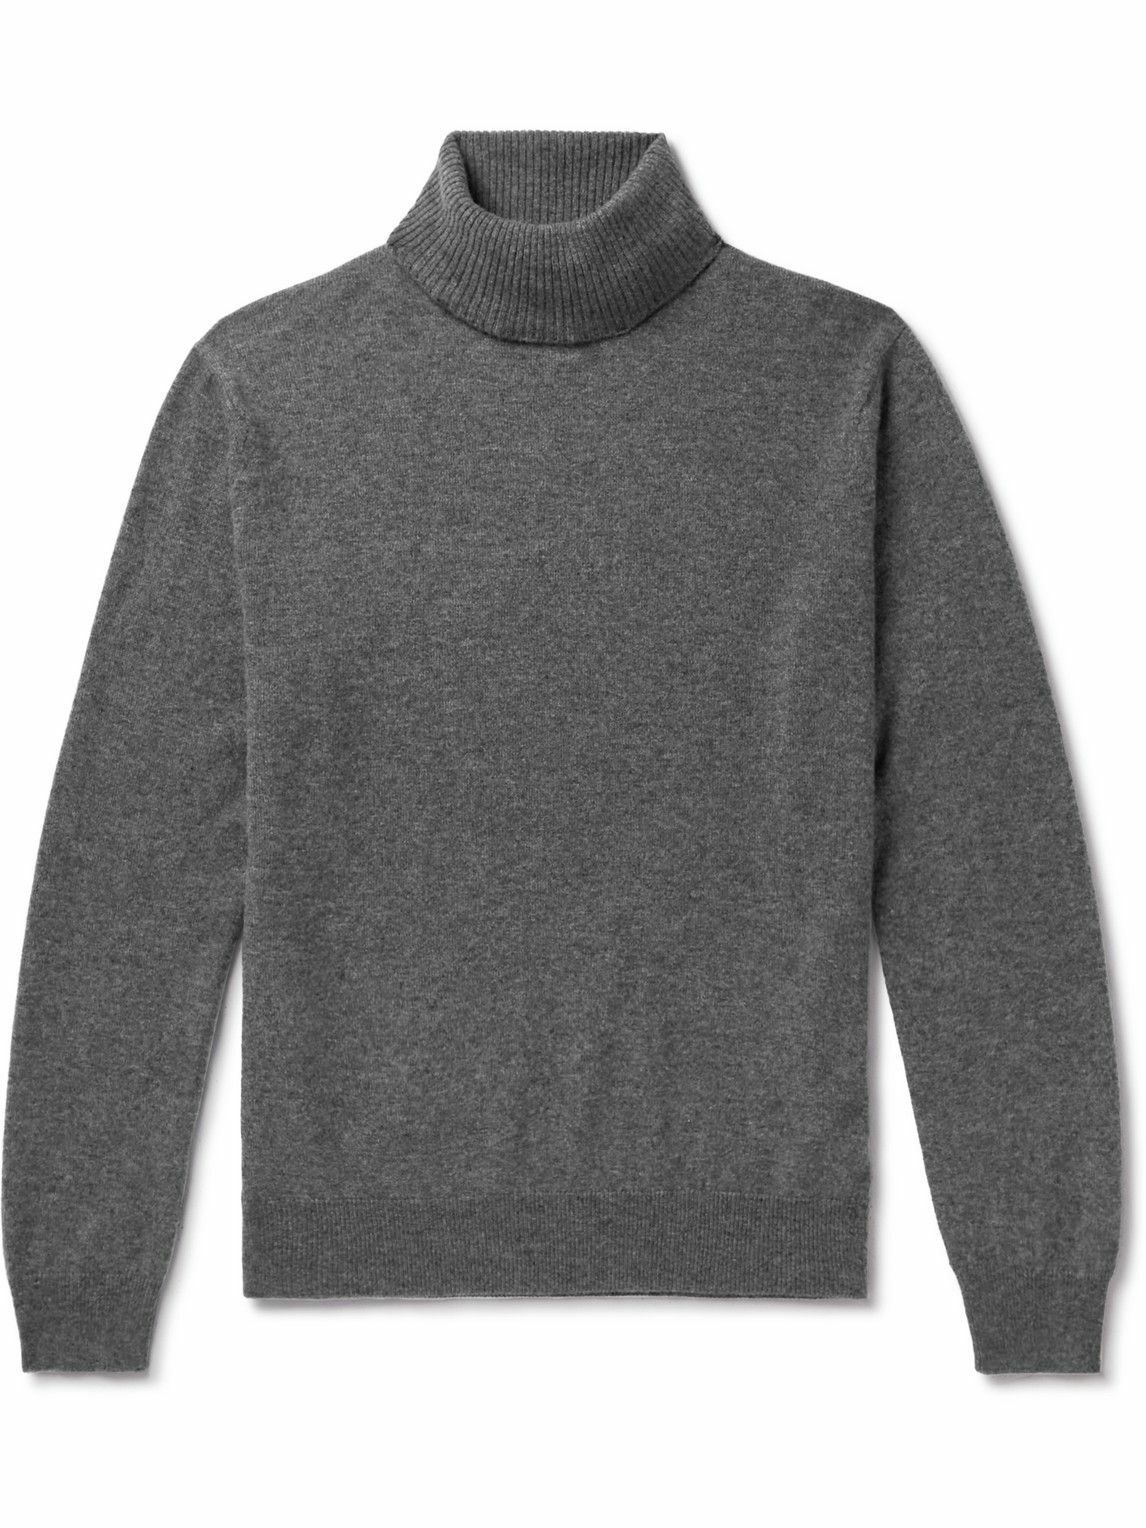 TOM FORD - Cashmere Rollneck Sweater - Gray TOM FORD